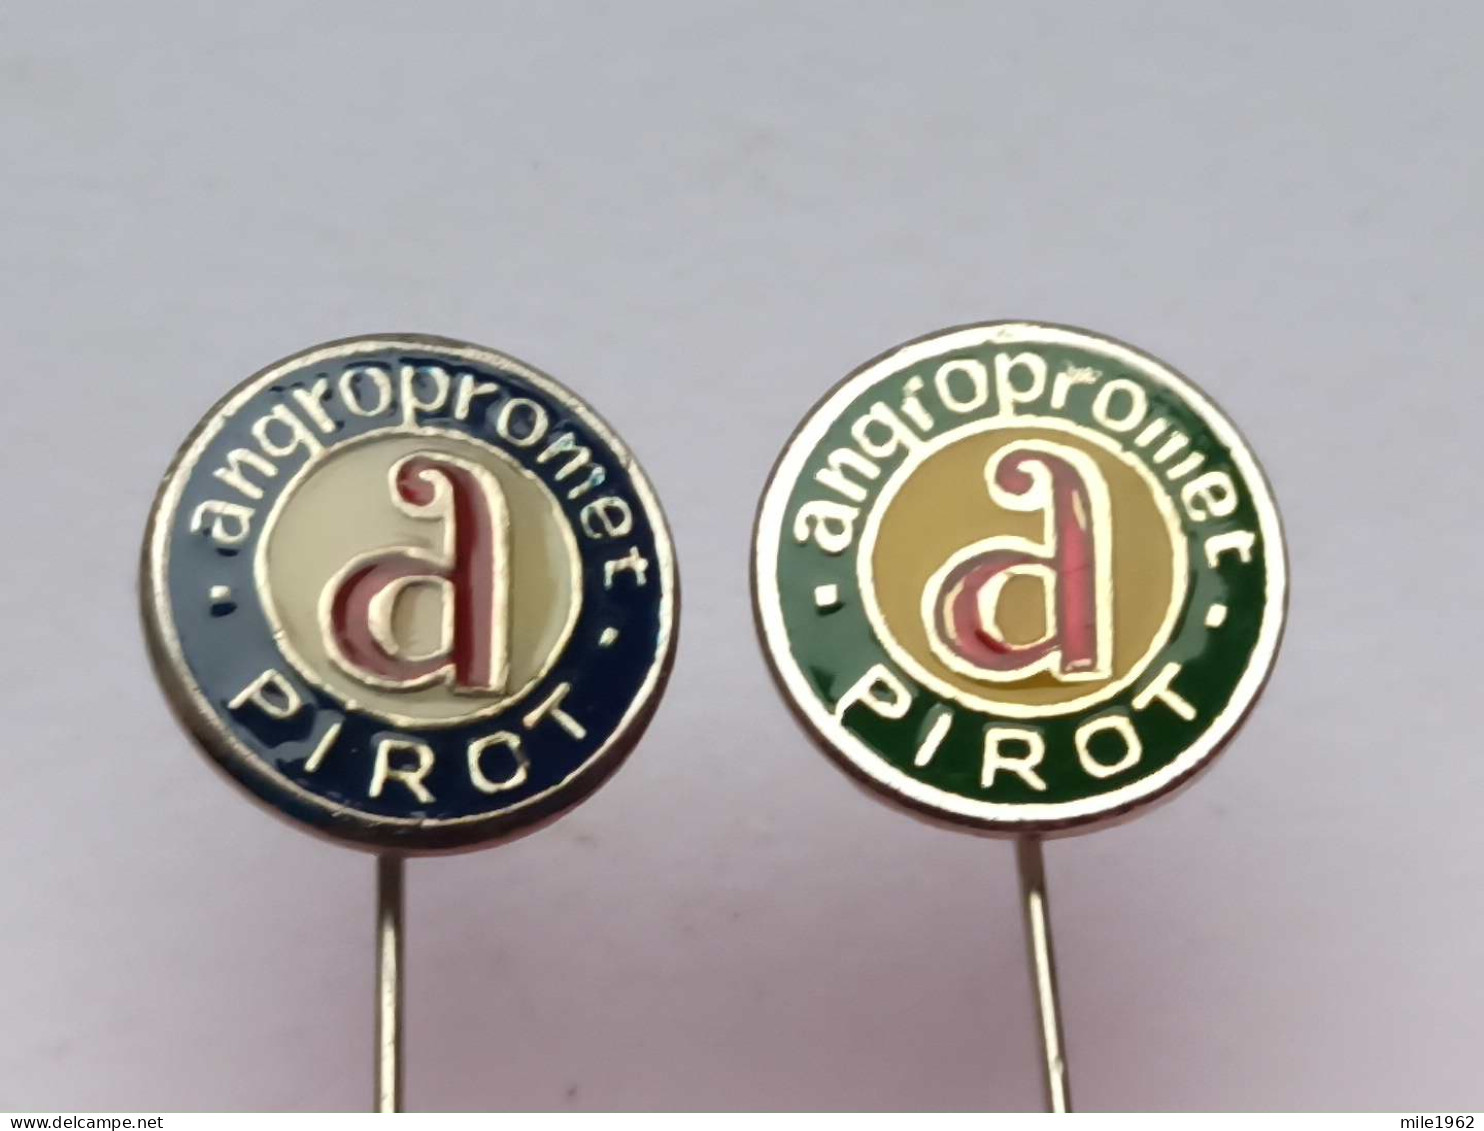 BADGE Z-98-16 - 2 PINS - ANGROPROMET PIROT SERBIA, AGRICULTURAL Agriculture Agricole - Lotes